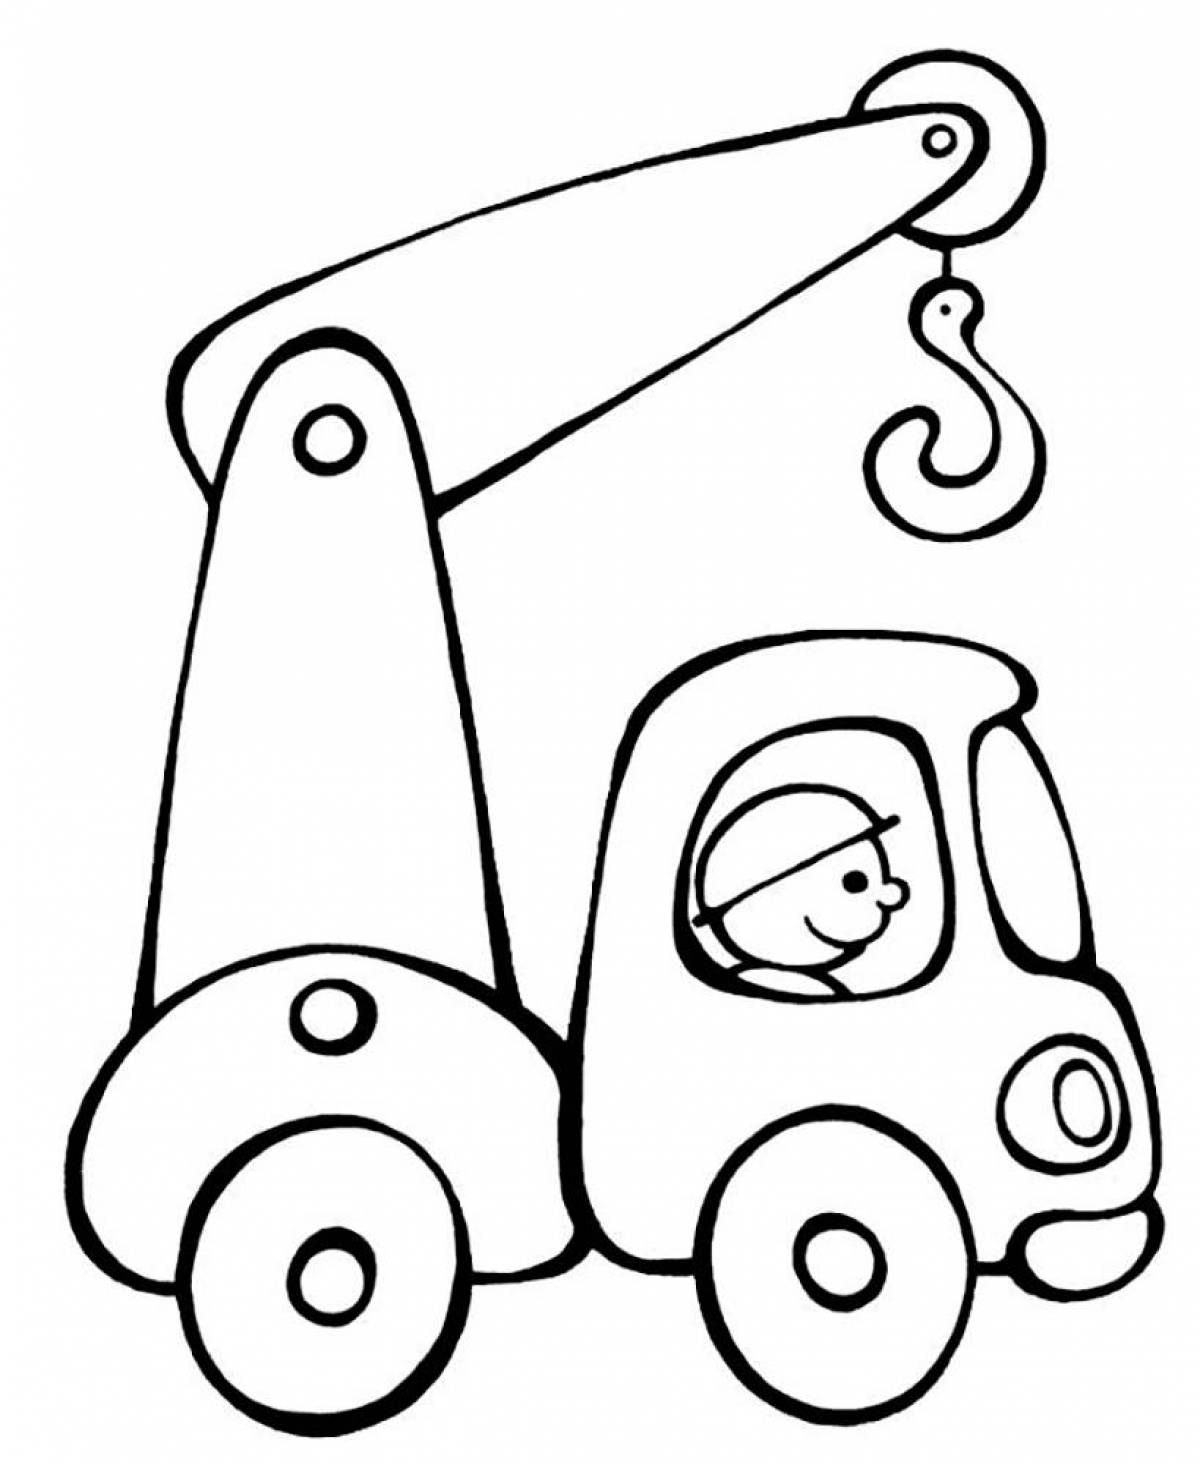 Coloring pages with adorable cars for 3-4 year olds